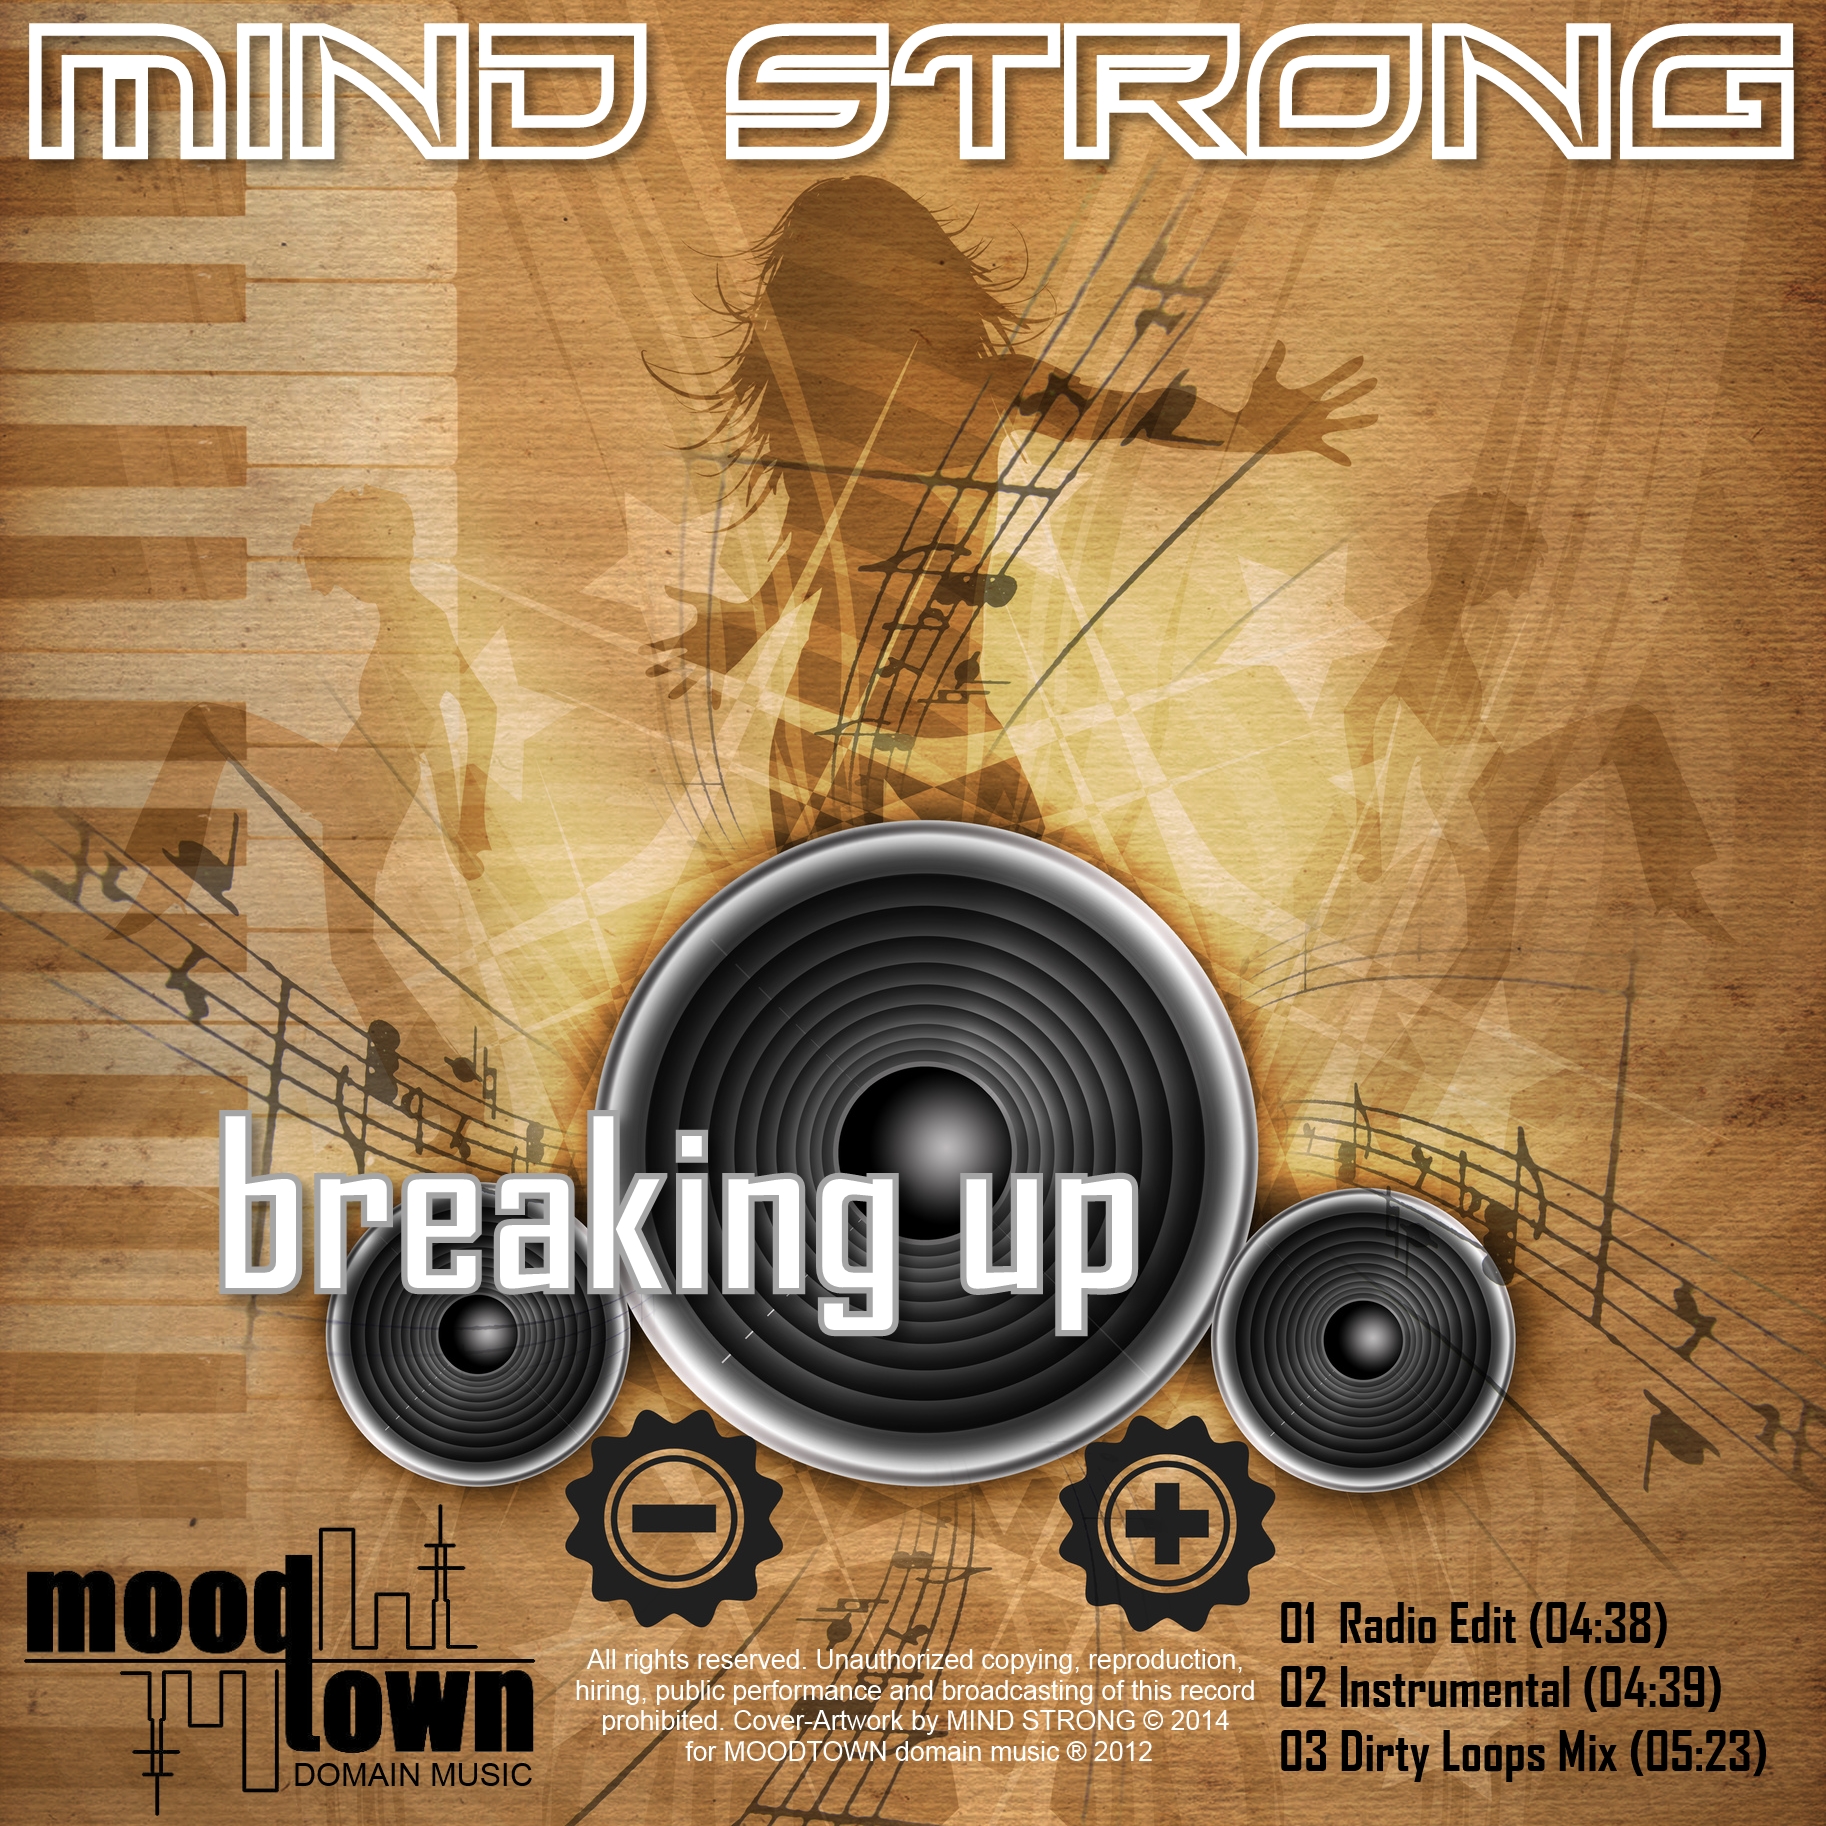 Cover of MIND STRONGs single release BREAKING UP